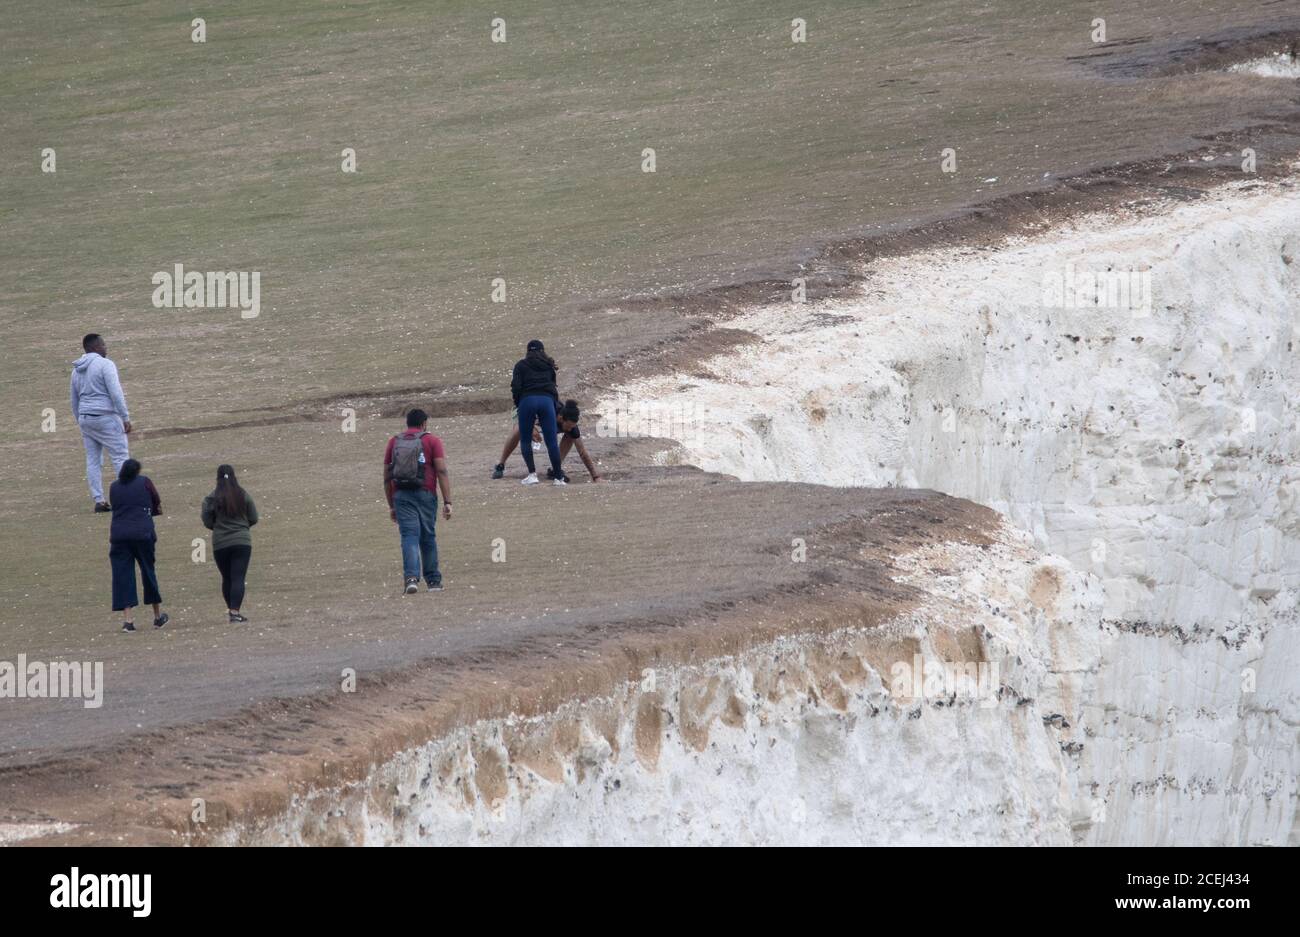 Beachy Head, Eastbourne, East Sussex, UK., . Visitors take risks near the fragile cliffs edge at the South Coast beauty spot Credit: Newspics UK South/Alamy Live News Stock Photo